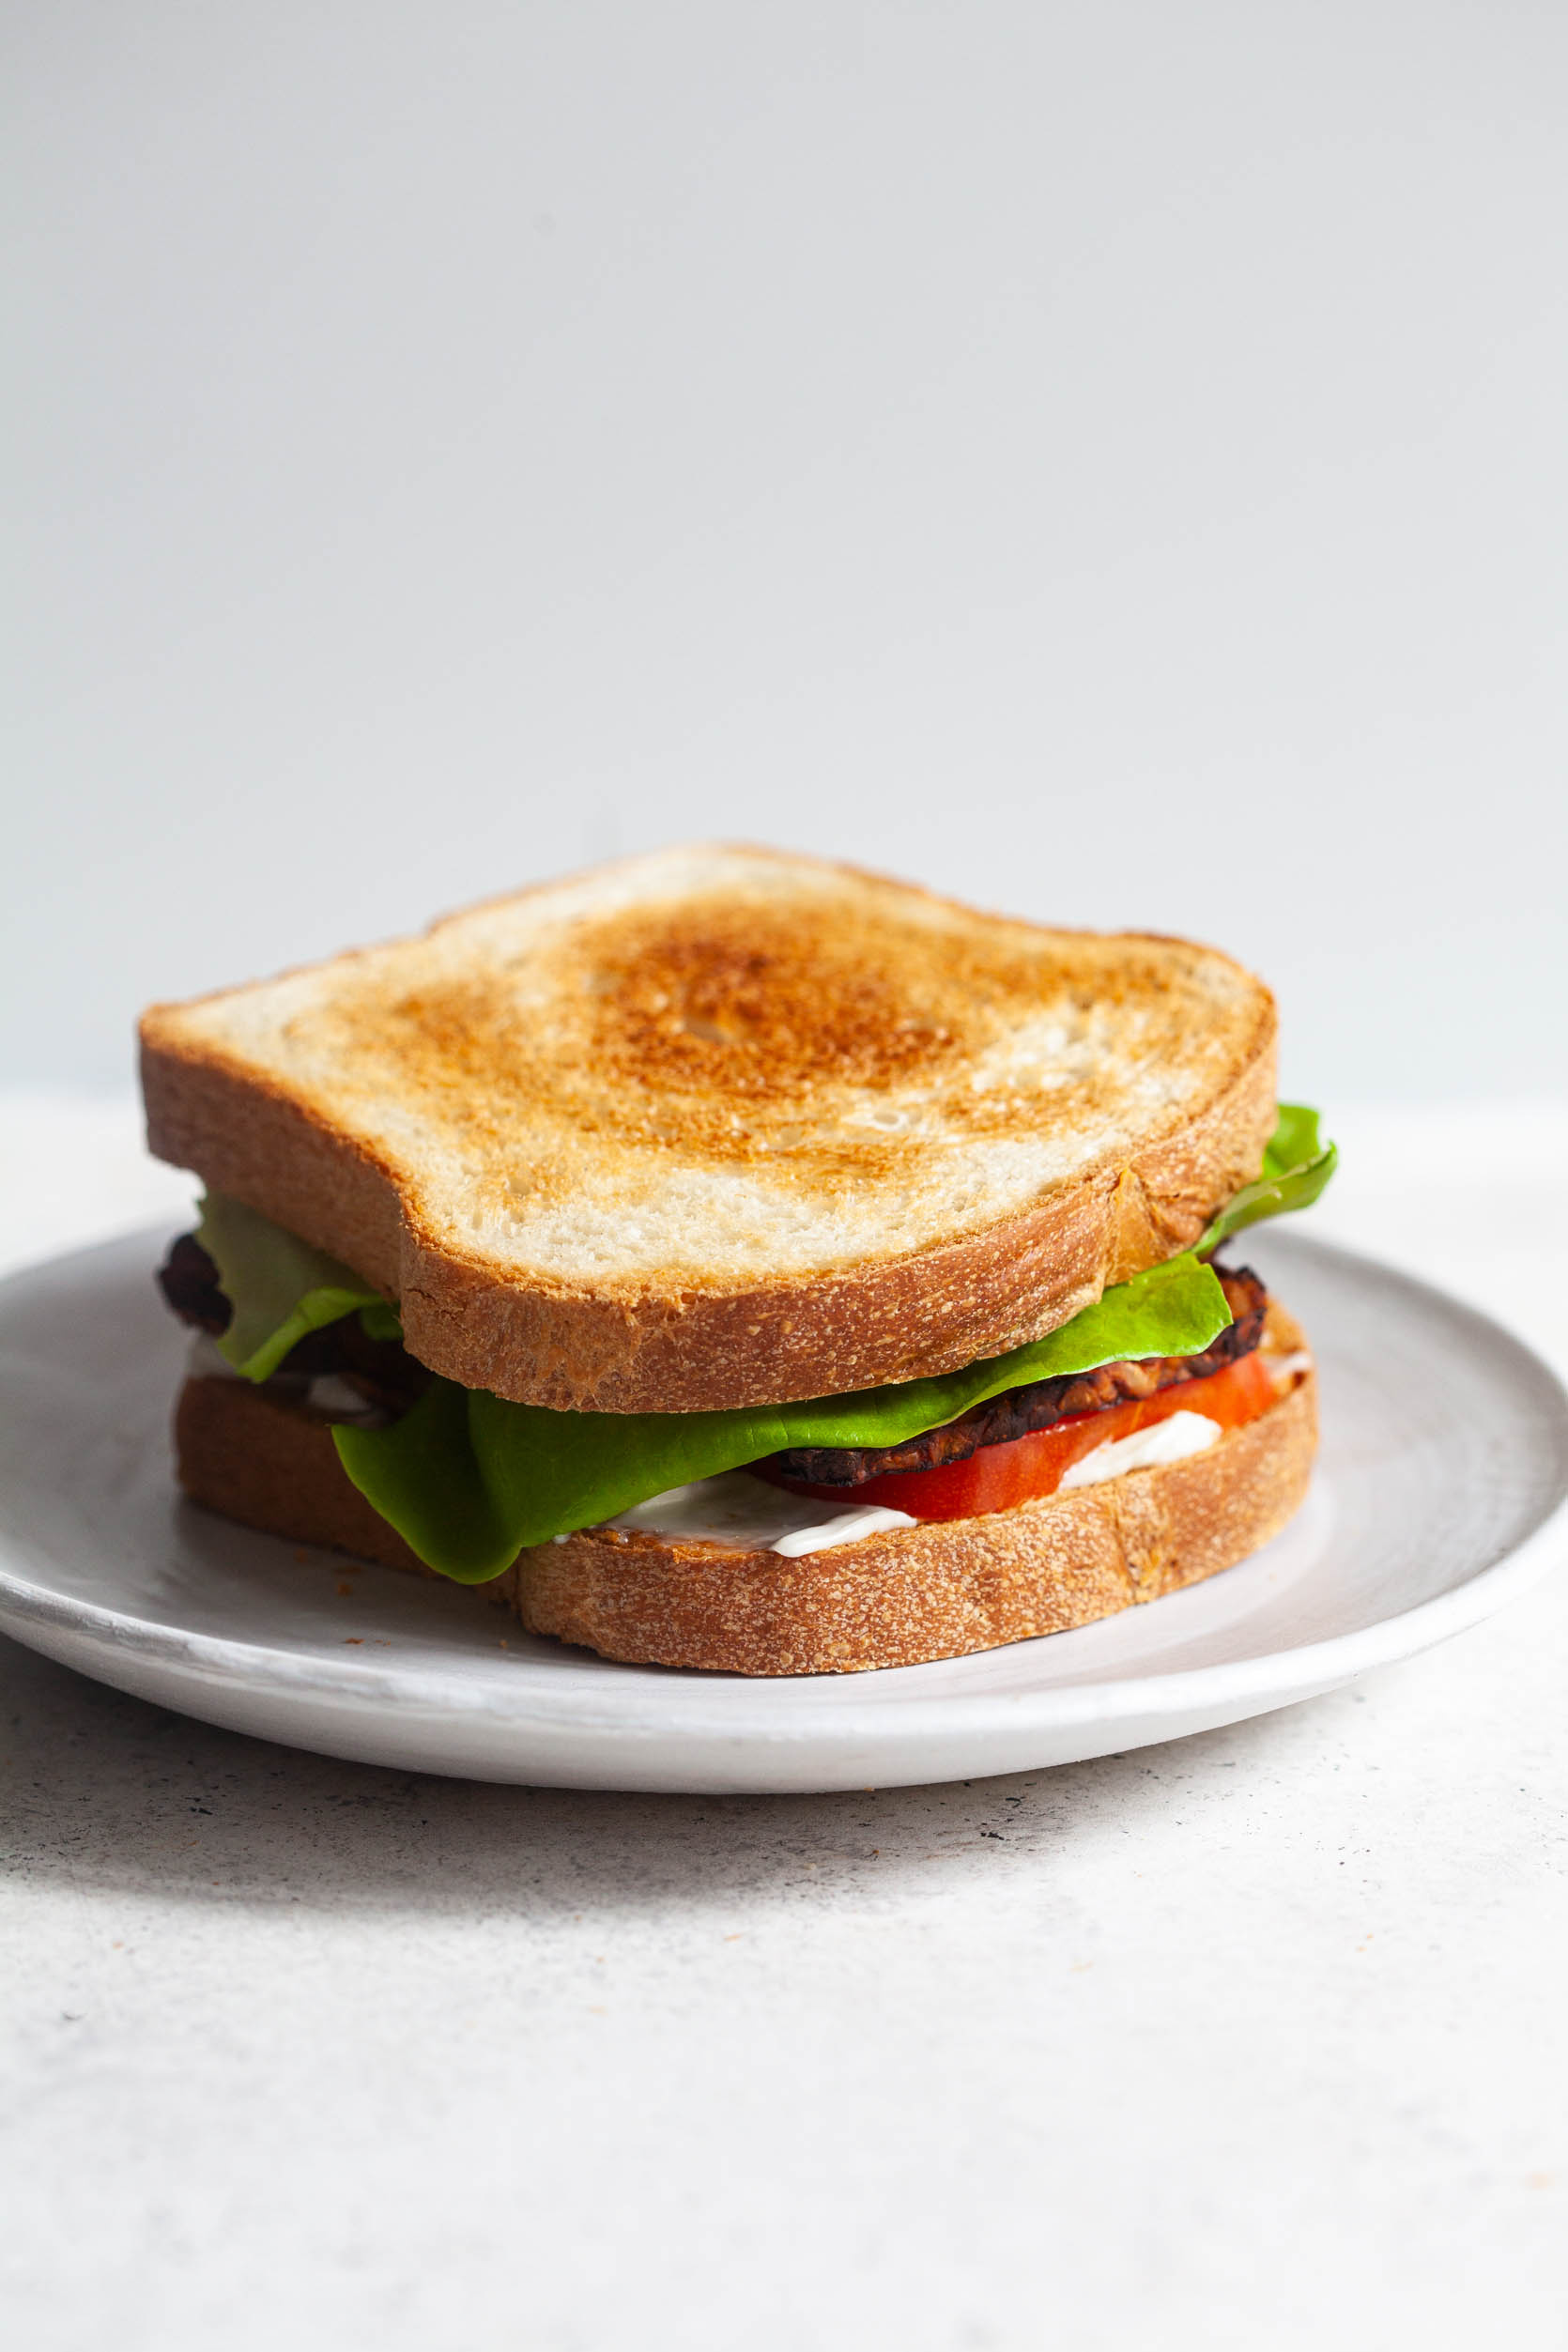 Sandwich: Mayonnaise, mustard, ketchup, or pesto are added to enhance the flavor. 1670x2510 HD Background.